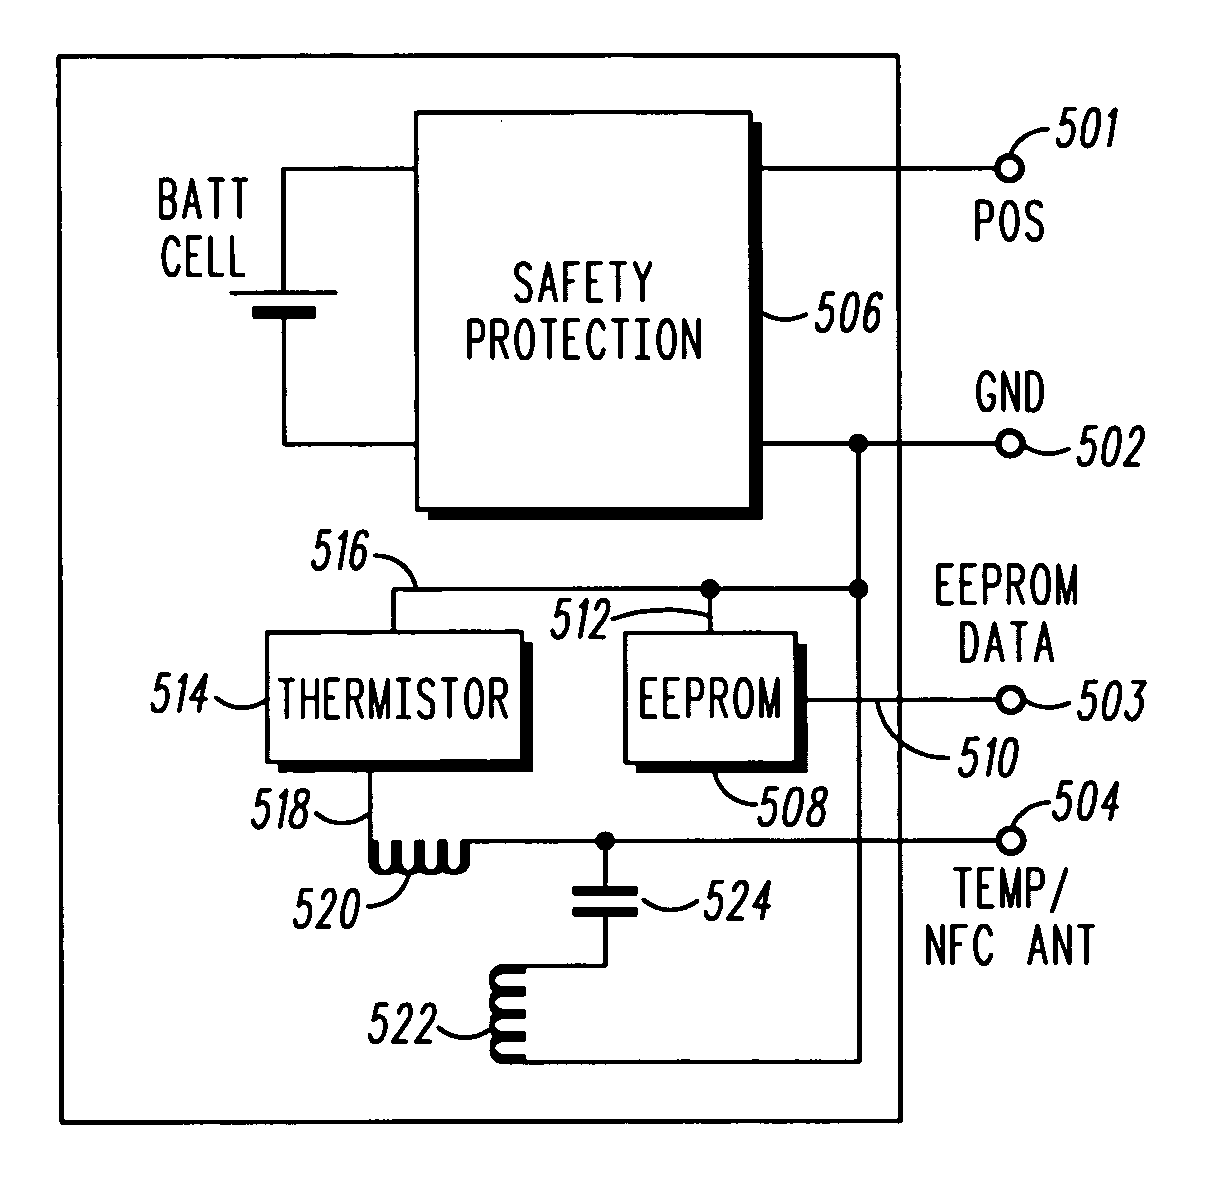 Wireless communication device with integrated battery/antenna system